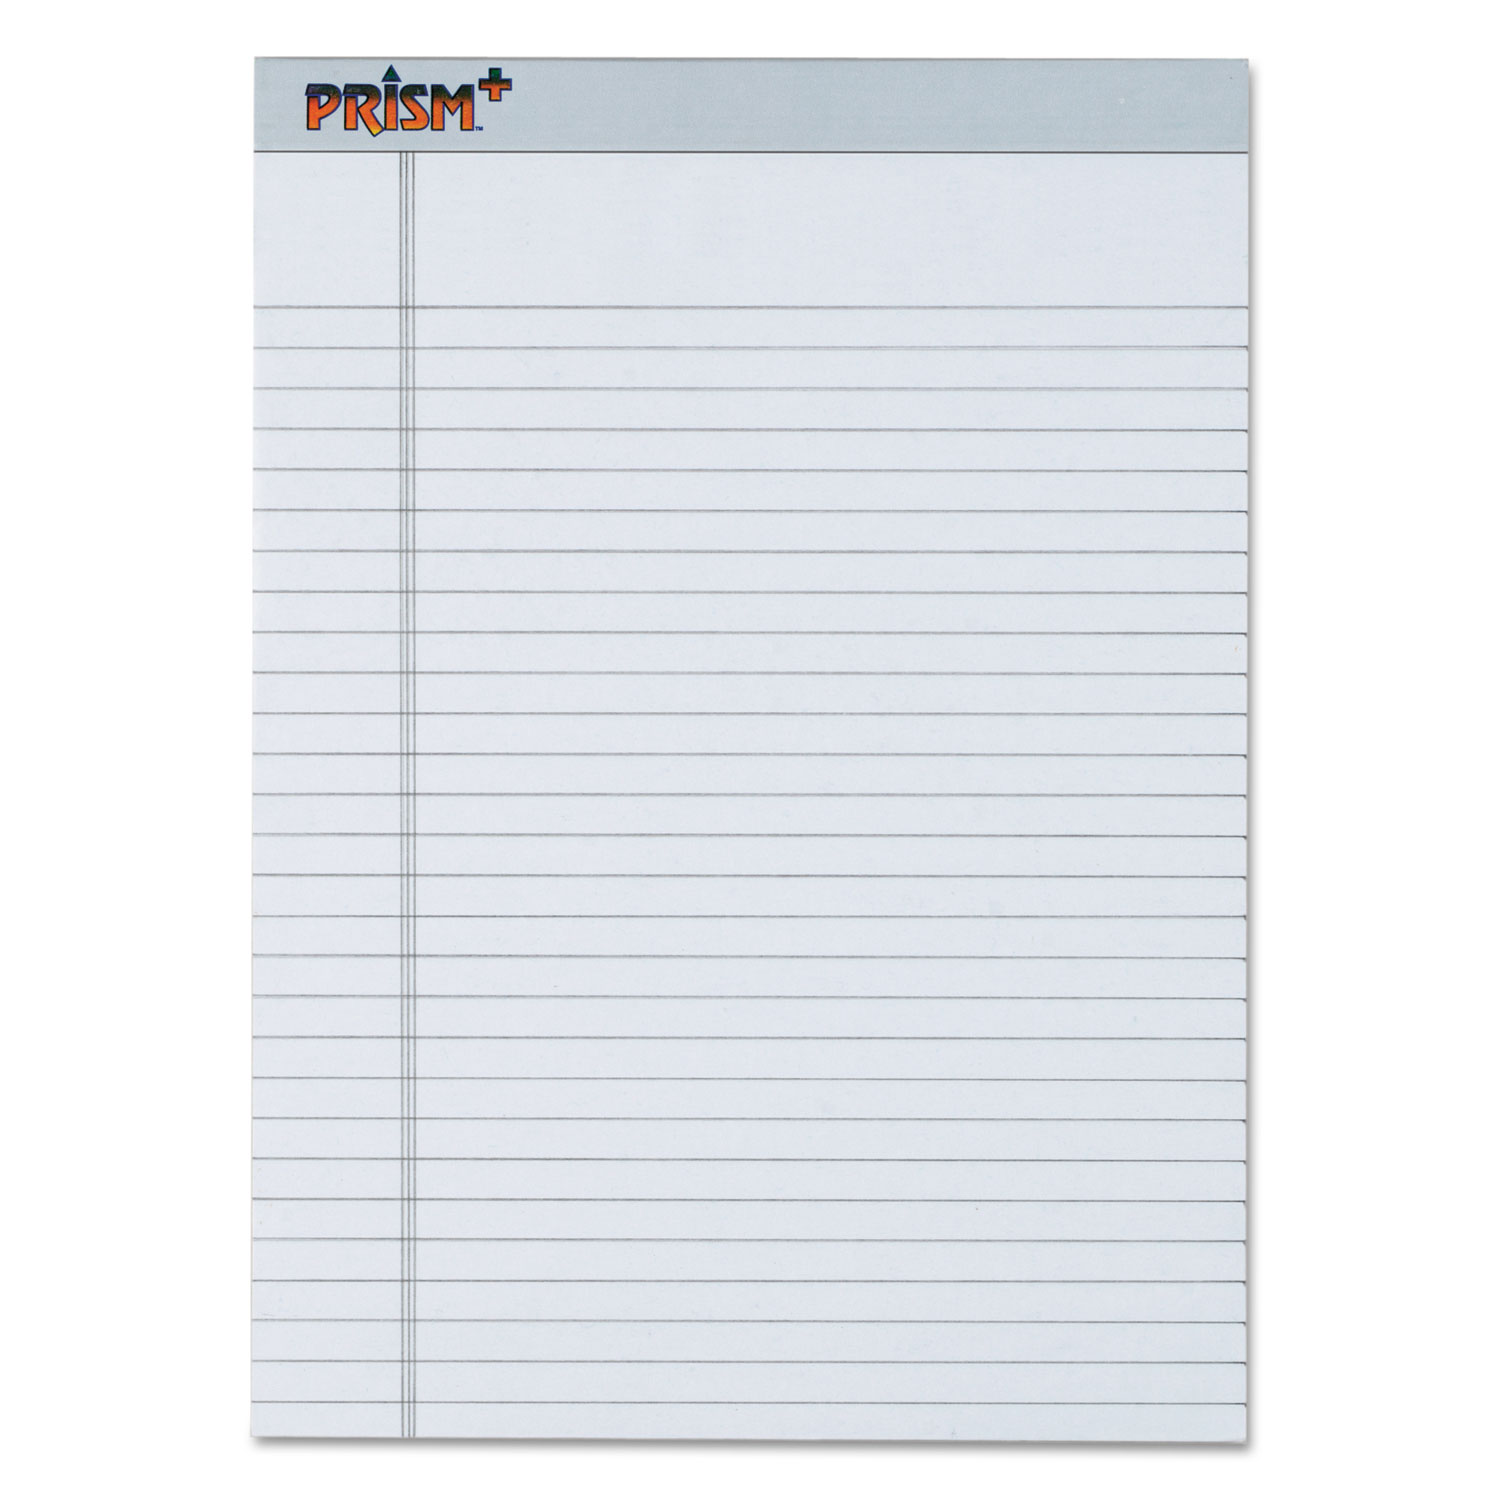  TOPS 63160 Prism + Writing Pads, Wide/Legal Rule, 8.5 x 11.75, Pastel Gray, 50 Sheets, 12/Pack (TOP63160) 